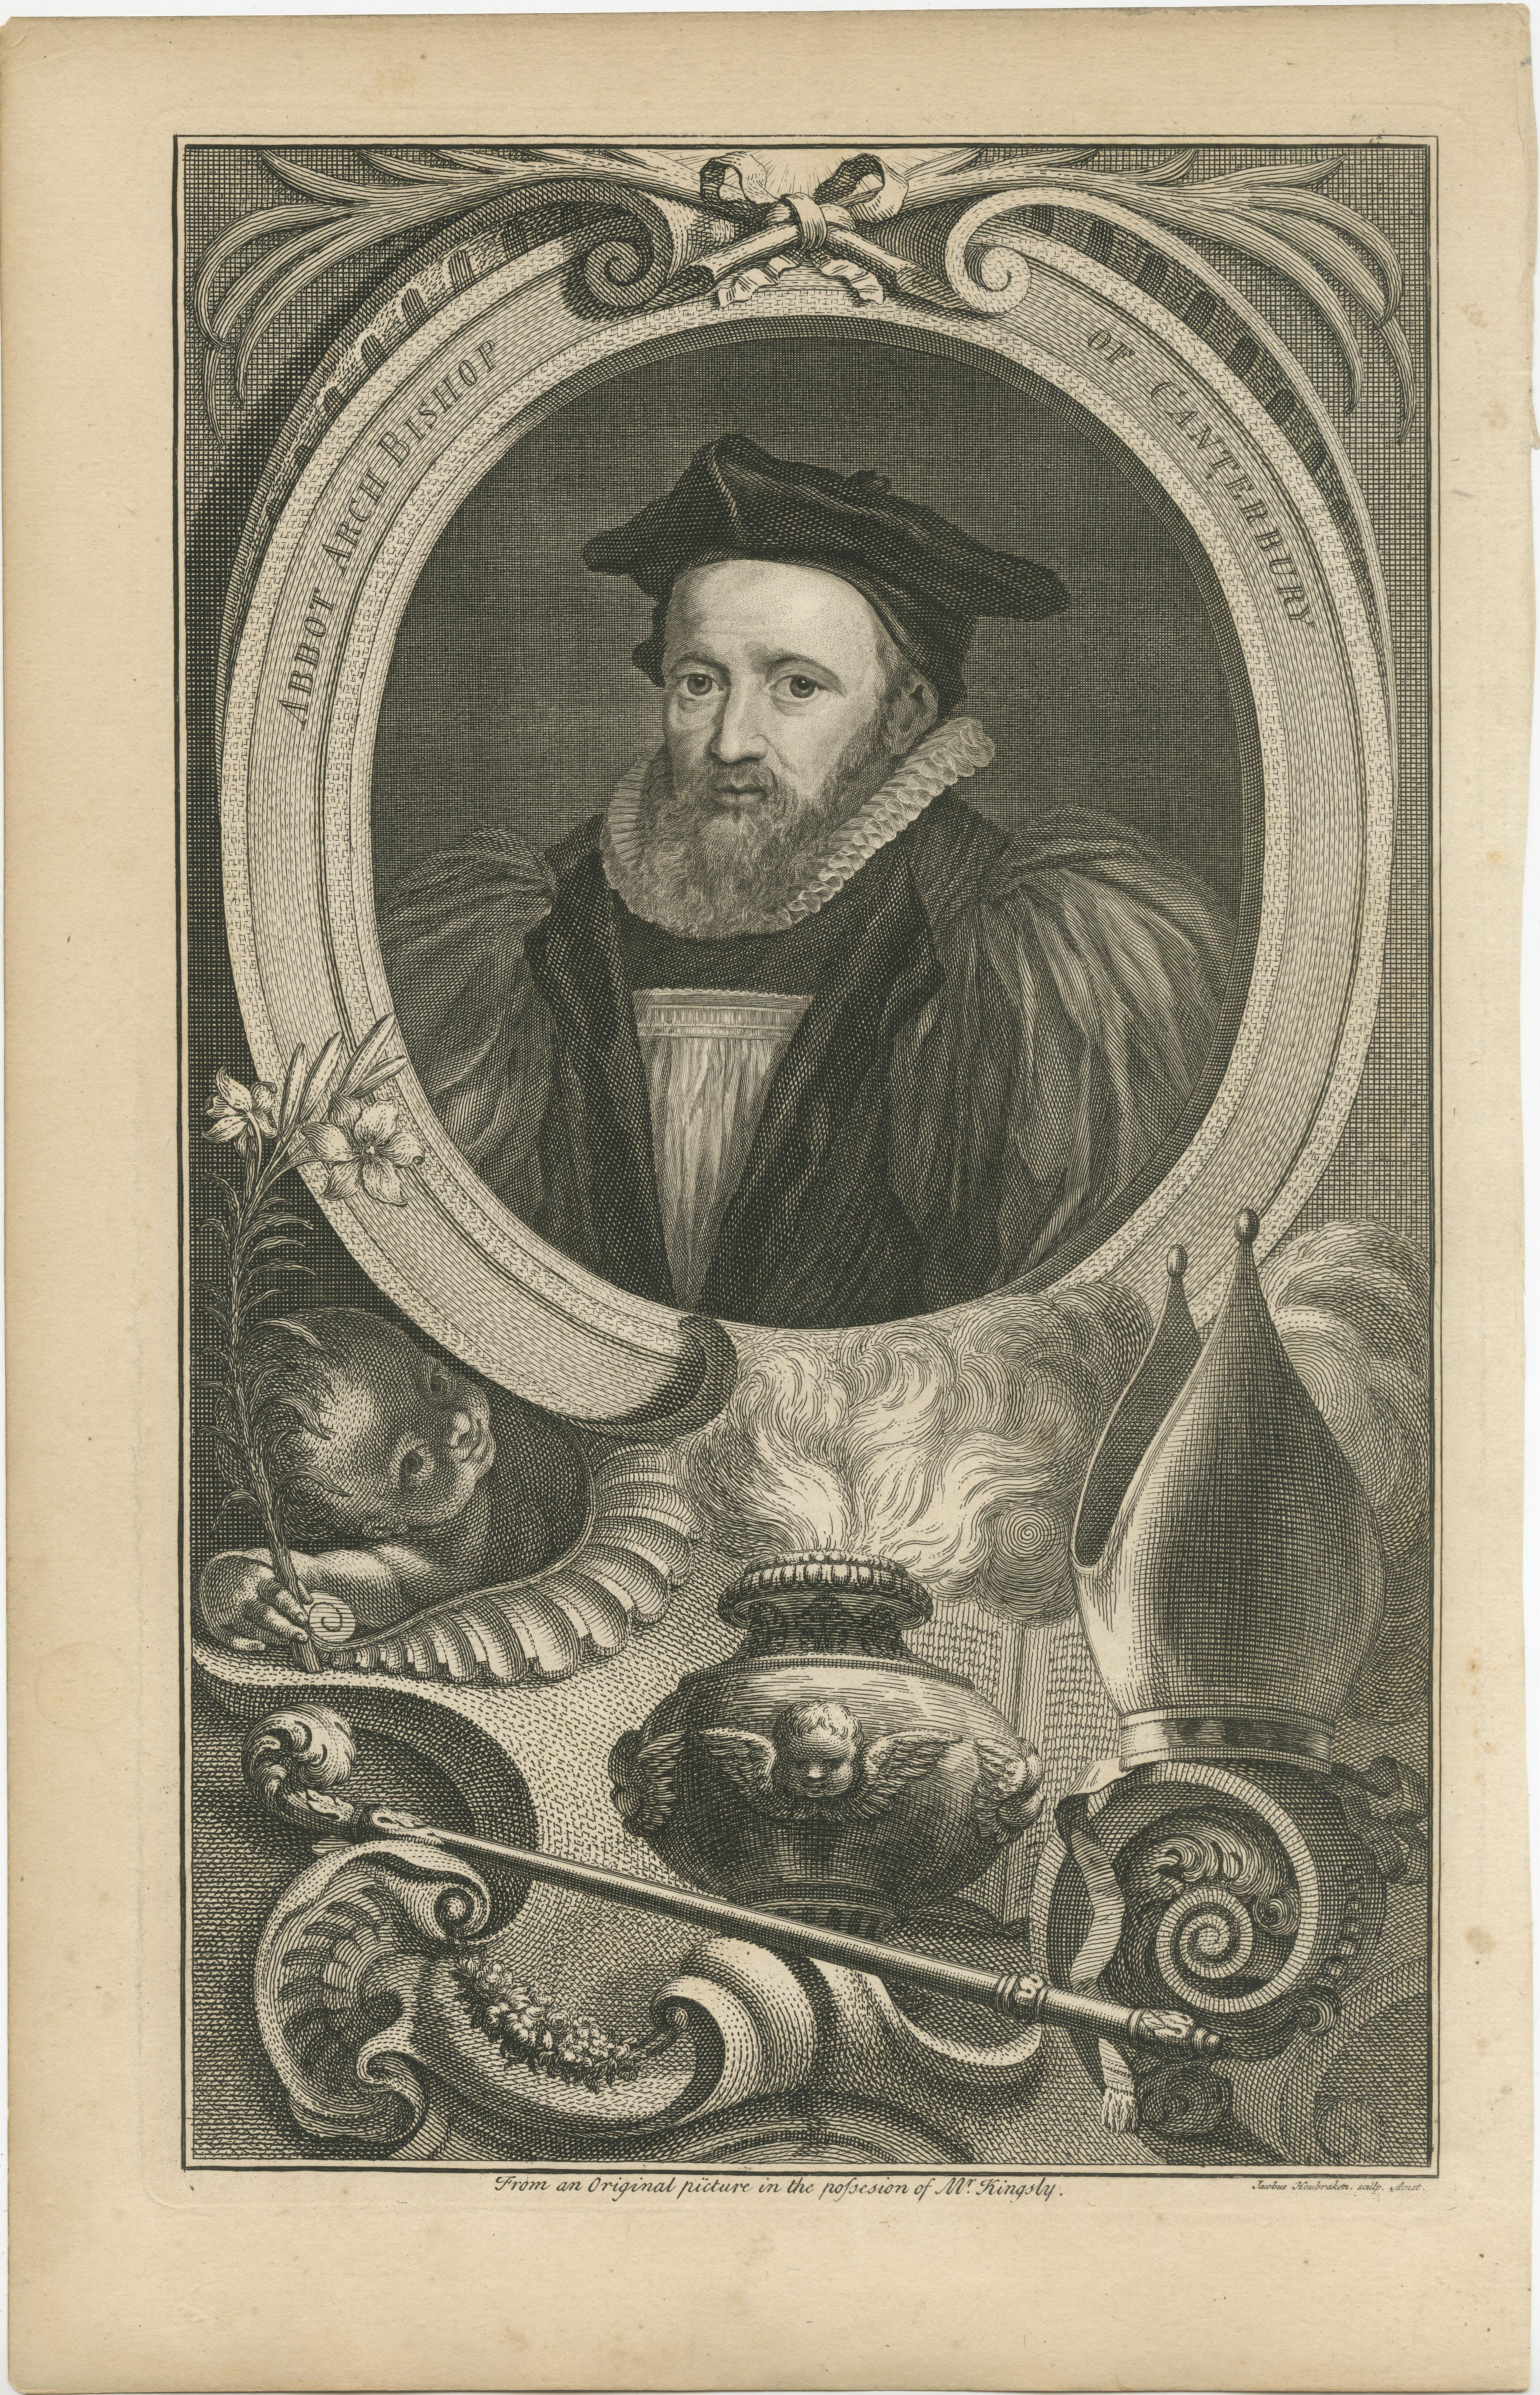 Antique portrait titled 'Abbot Arch Bishop of Canterbury'. George Abbot (29 October 1562 – 4 August 1633) was an English divine who was Archbishop of Canterbury from 1611 to 1633. He also served as the fourth Chancellor of the University of Dublin,